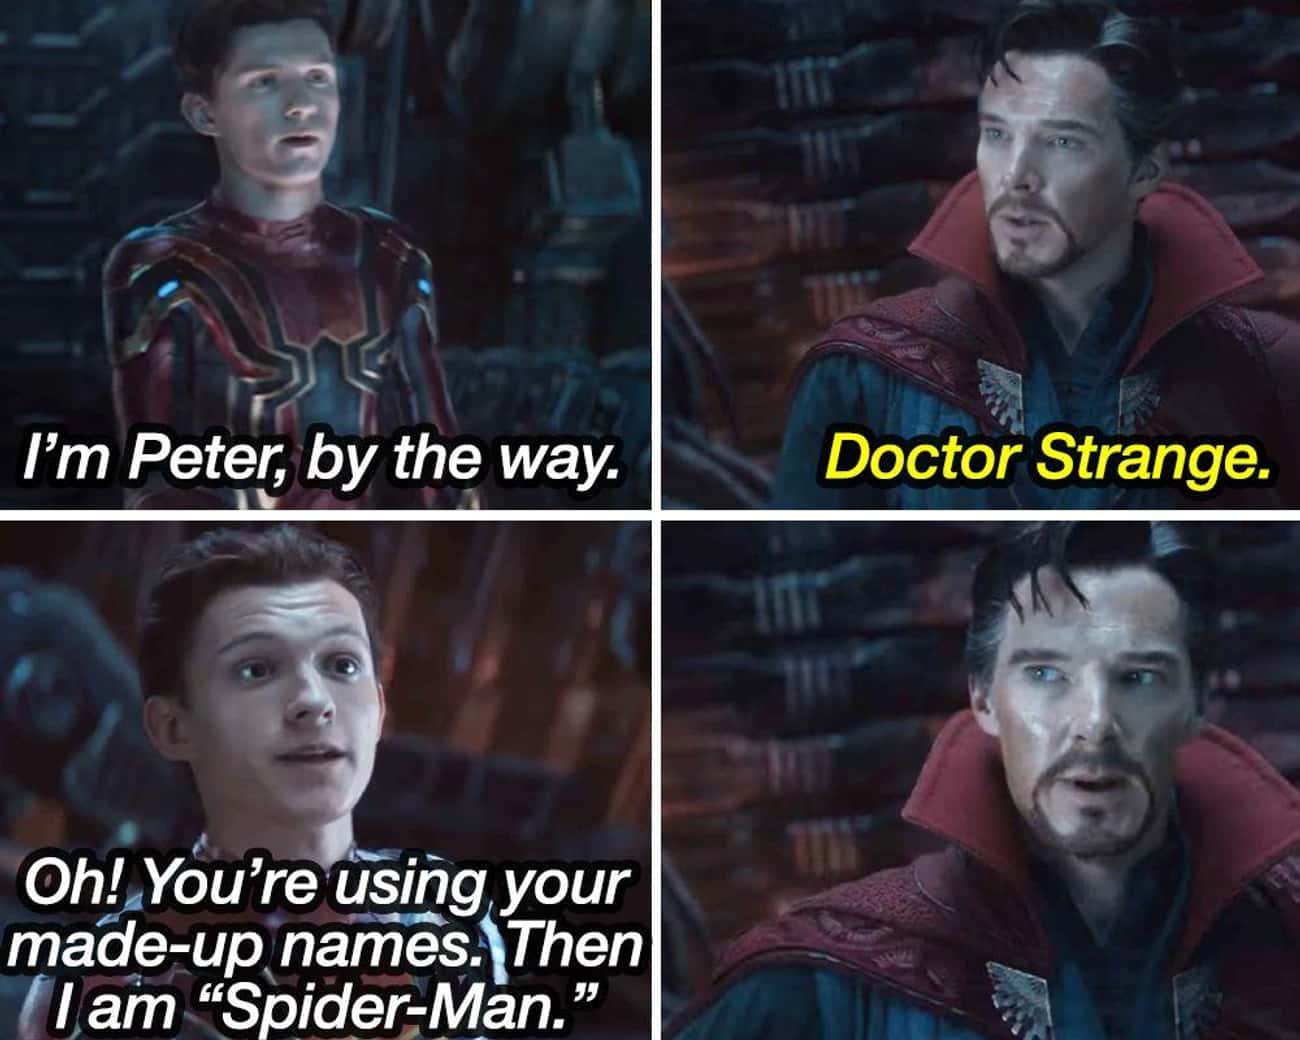 In ‘Avengers: Infinity War,’ Spider-Man Points Out The Awkwardness In Everyone Using Their ‘Made-Up Names’